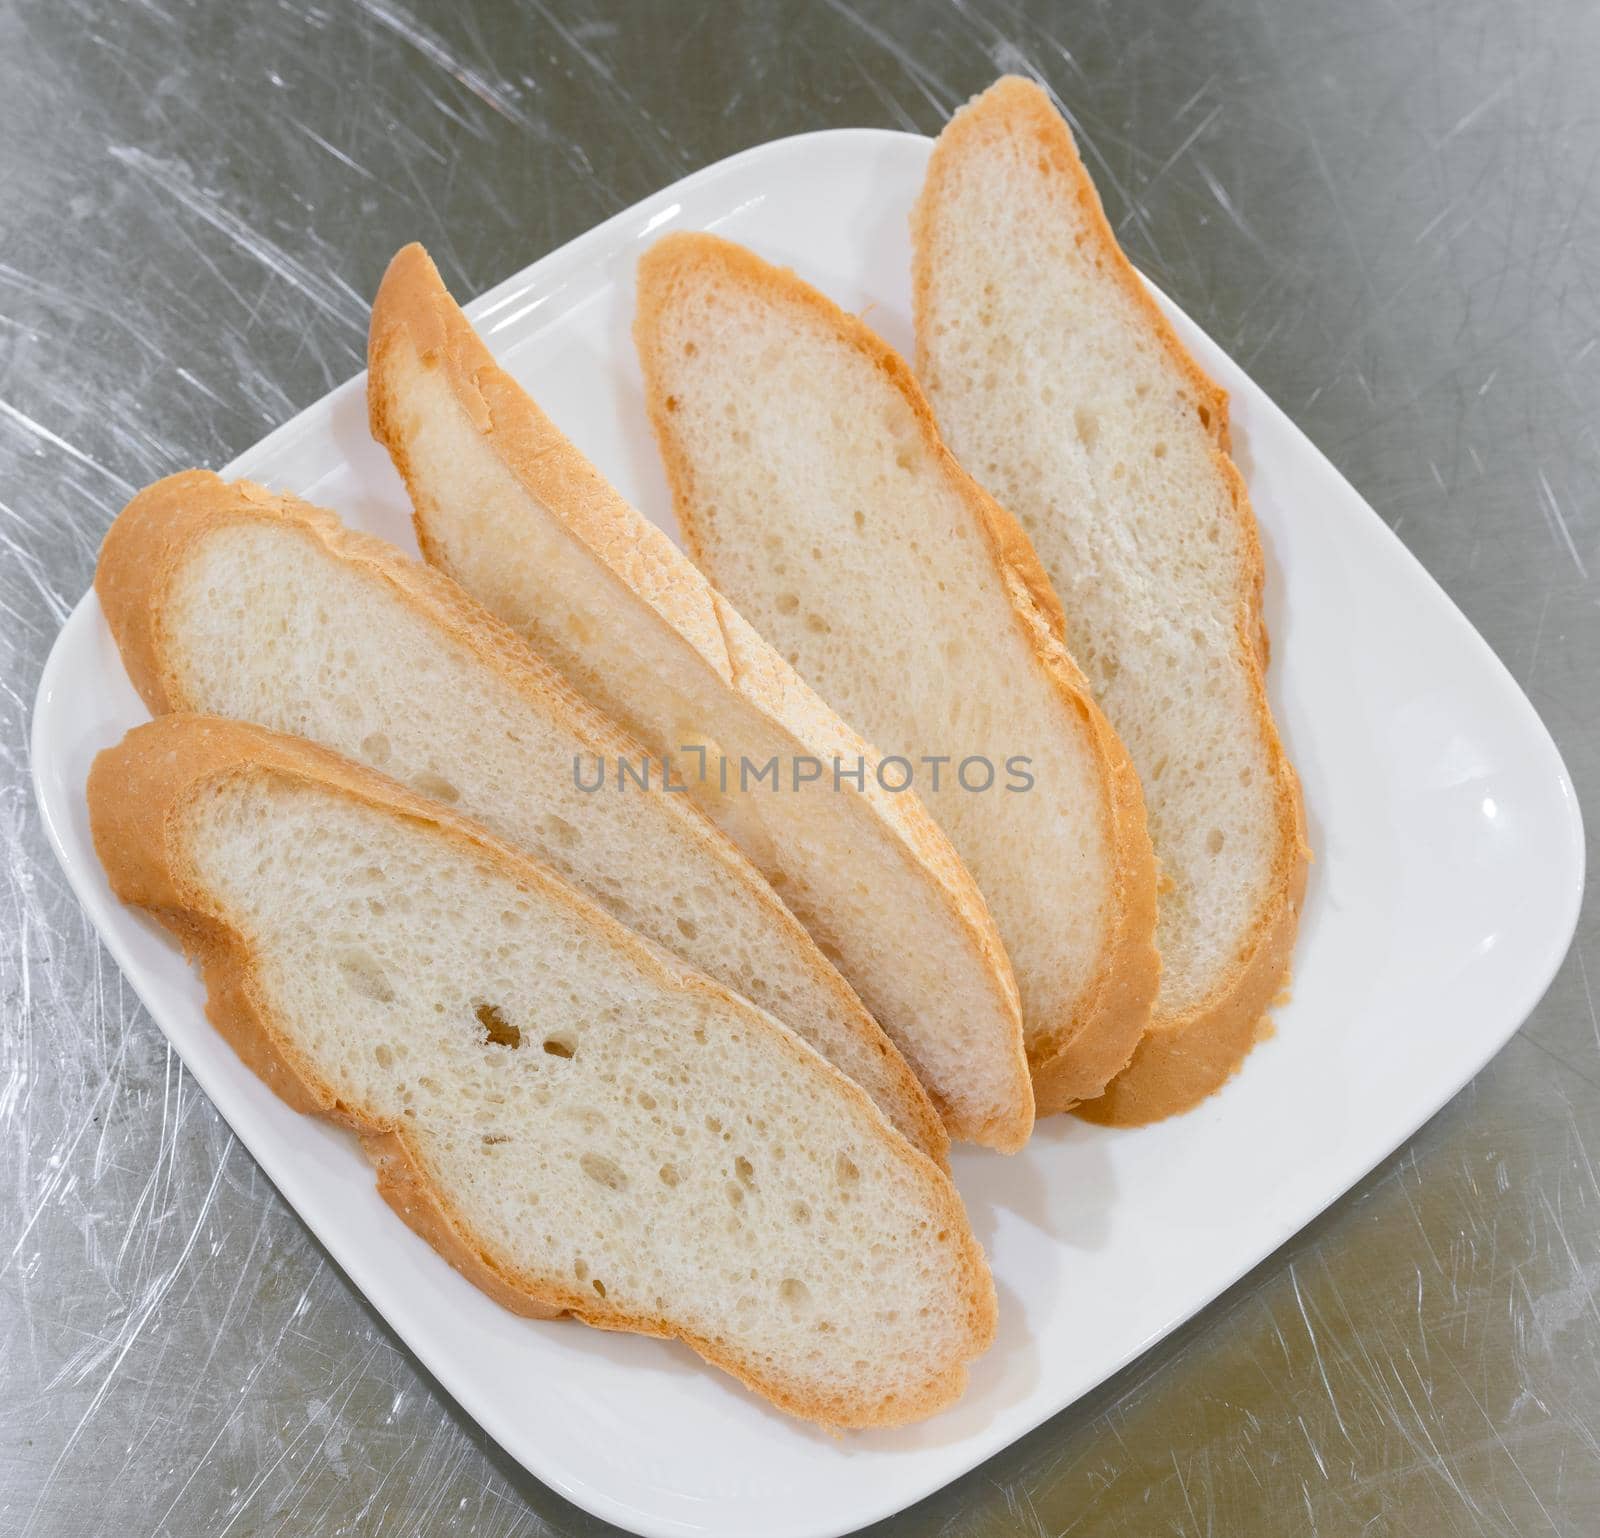 Bread sliced in plate on stainless table